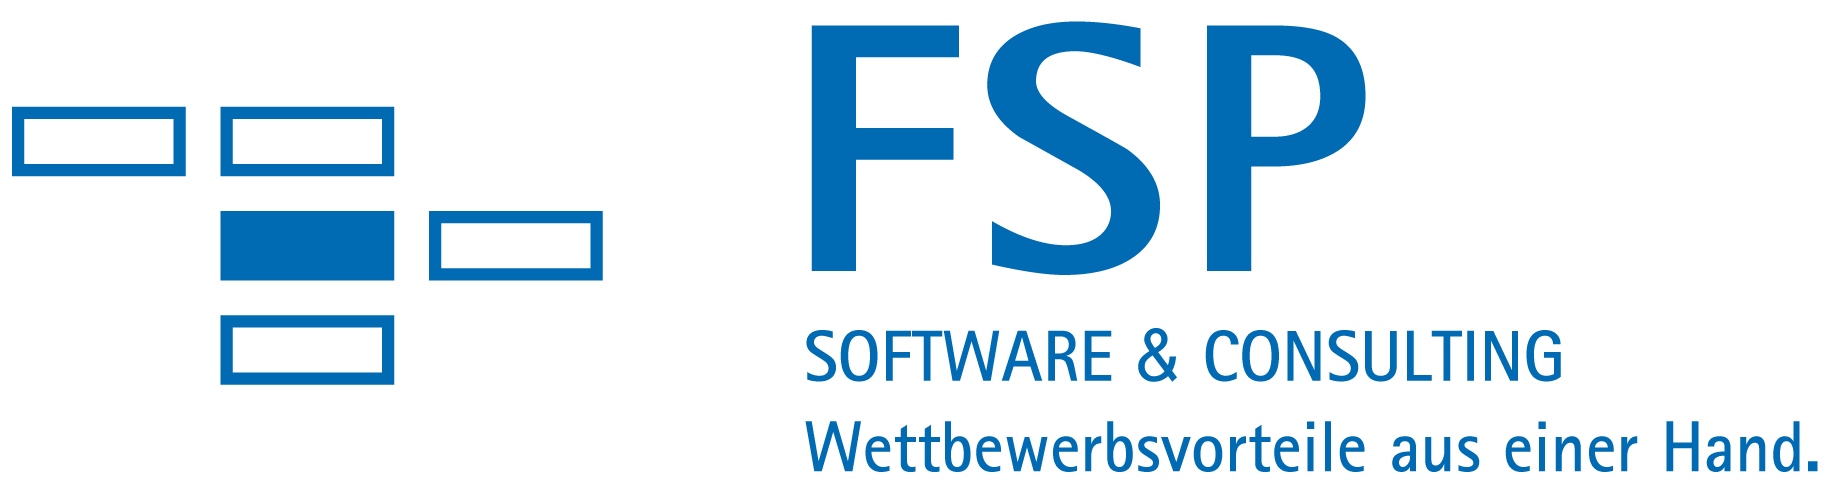 FSP GmbH Software & Consulting